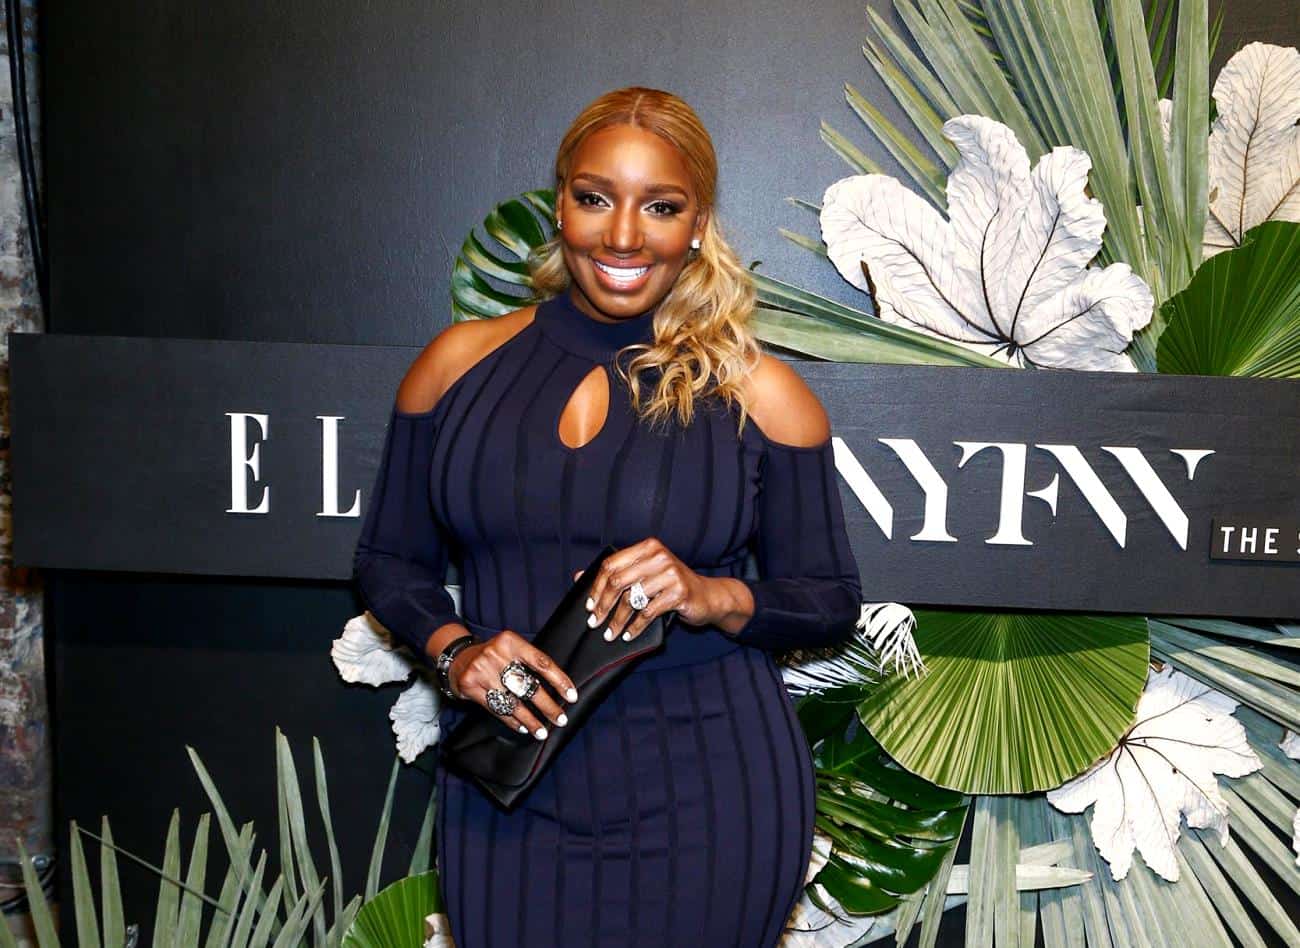 Is Nene Leakes Getting Her Own Spinoff Show? She Speaks Out, Plus She Denies Being Suspended by Bravo